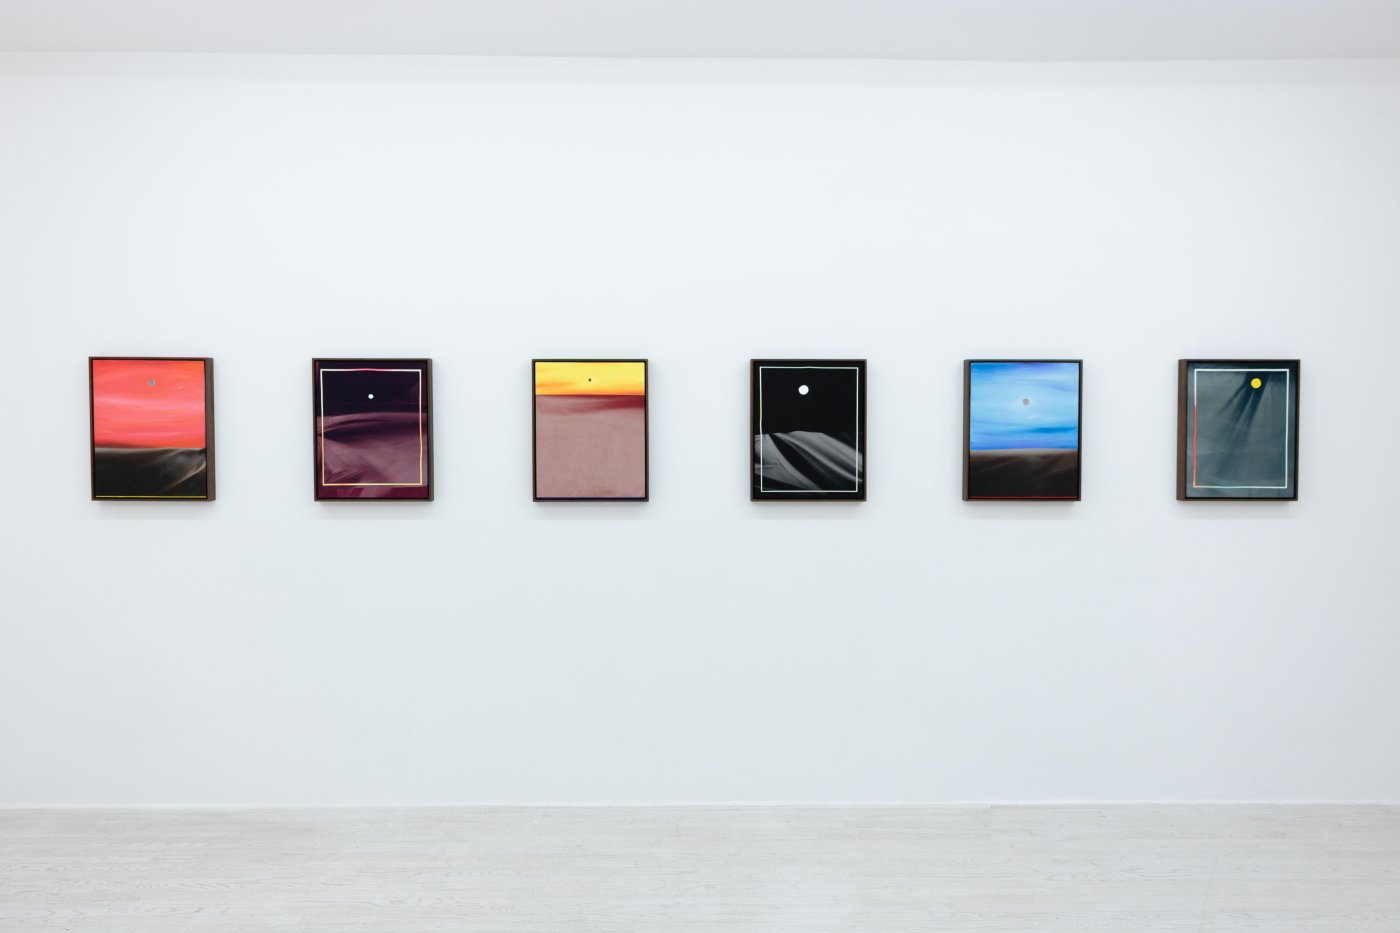 Installation image for Chris Duncan - Strawberry, at Halsey McKay Gallery